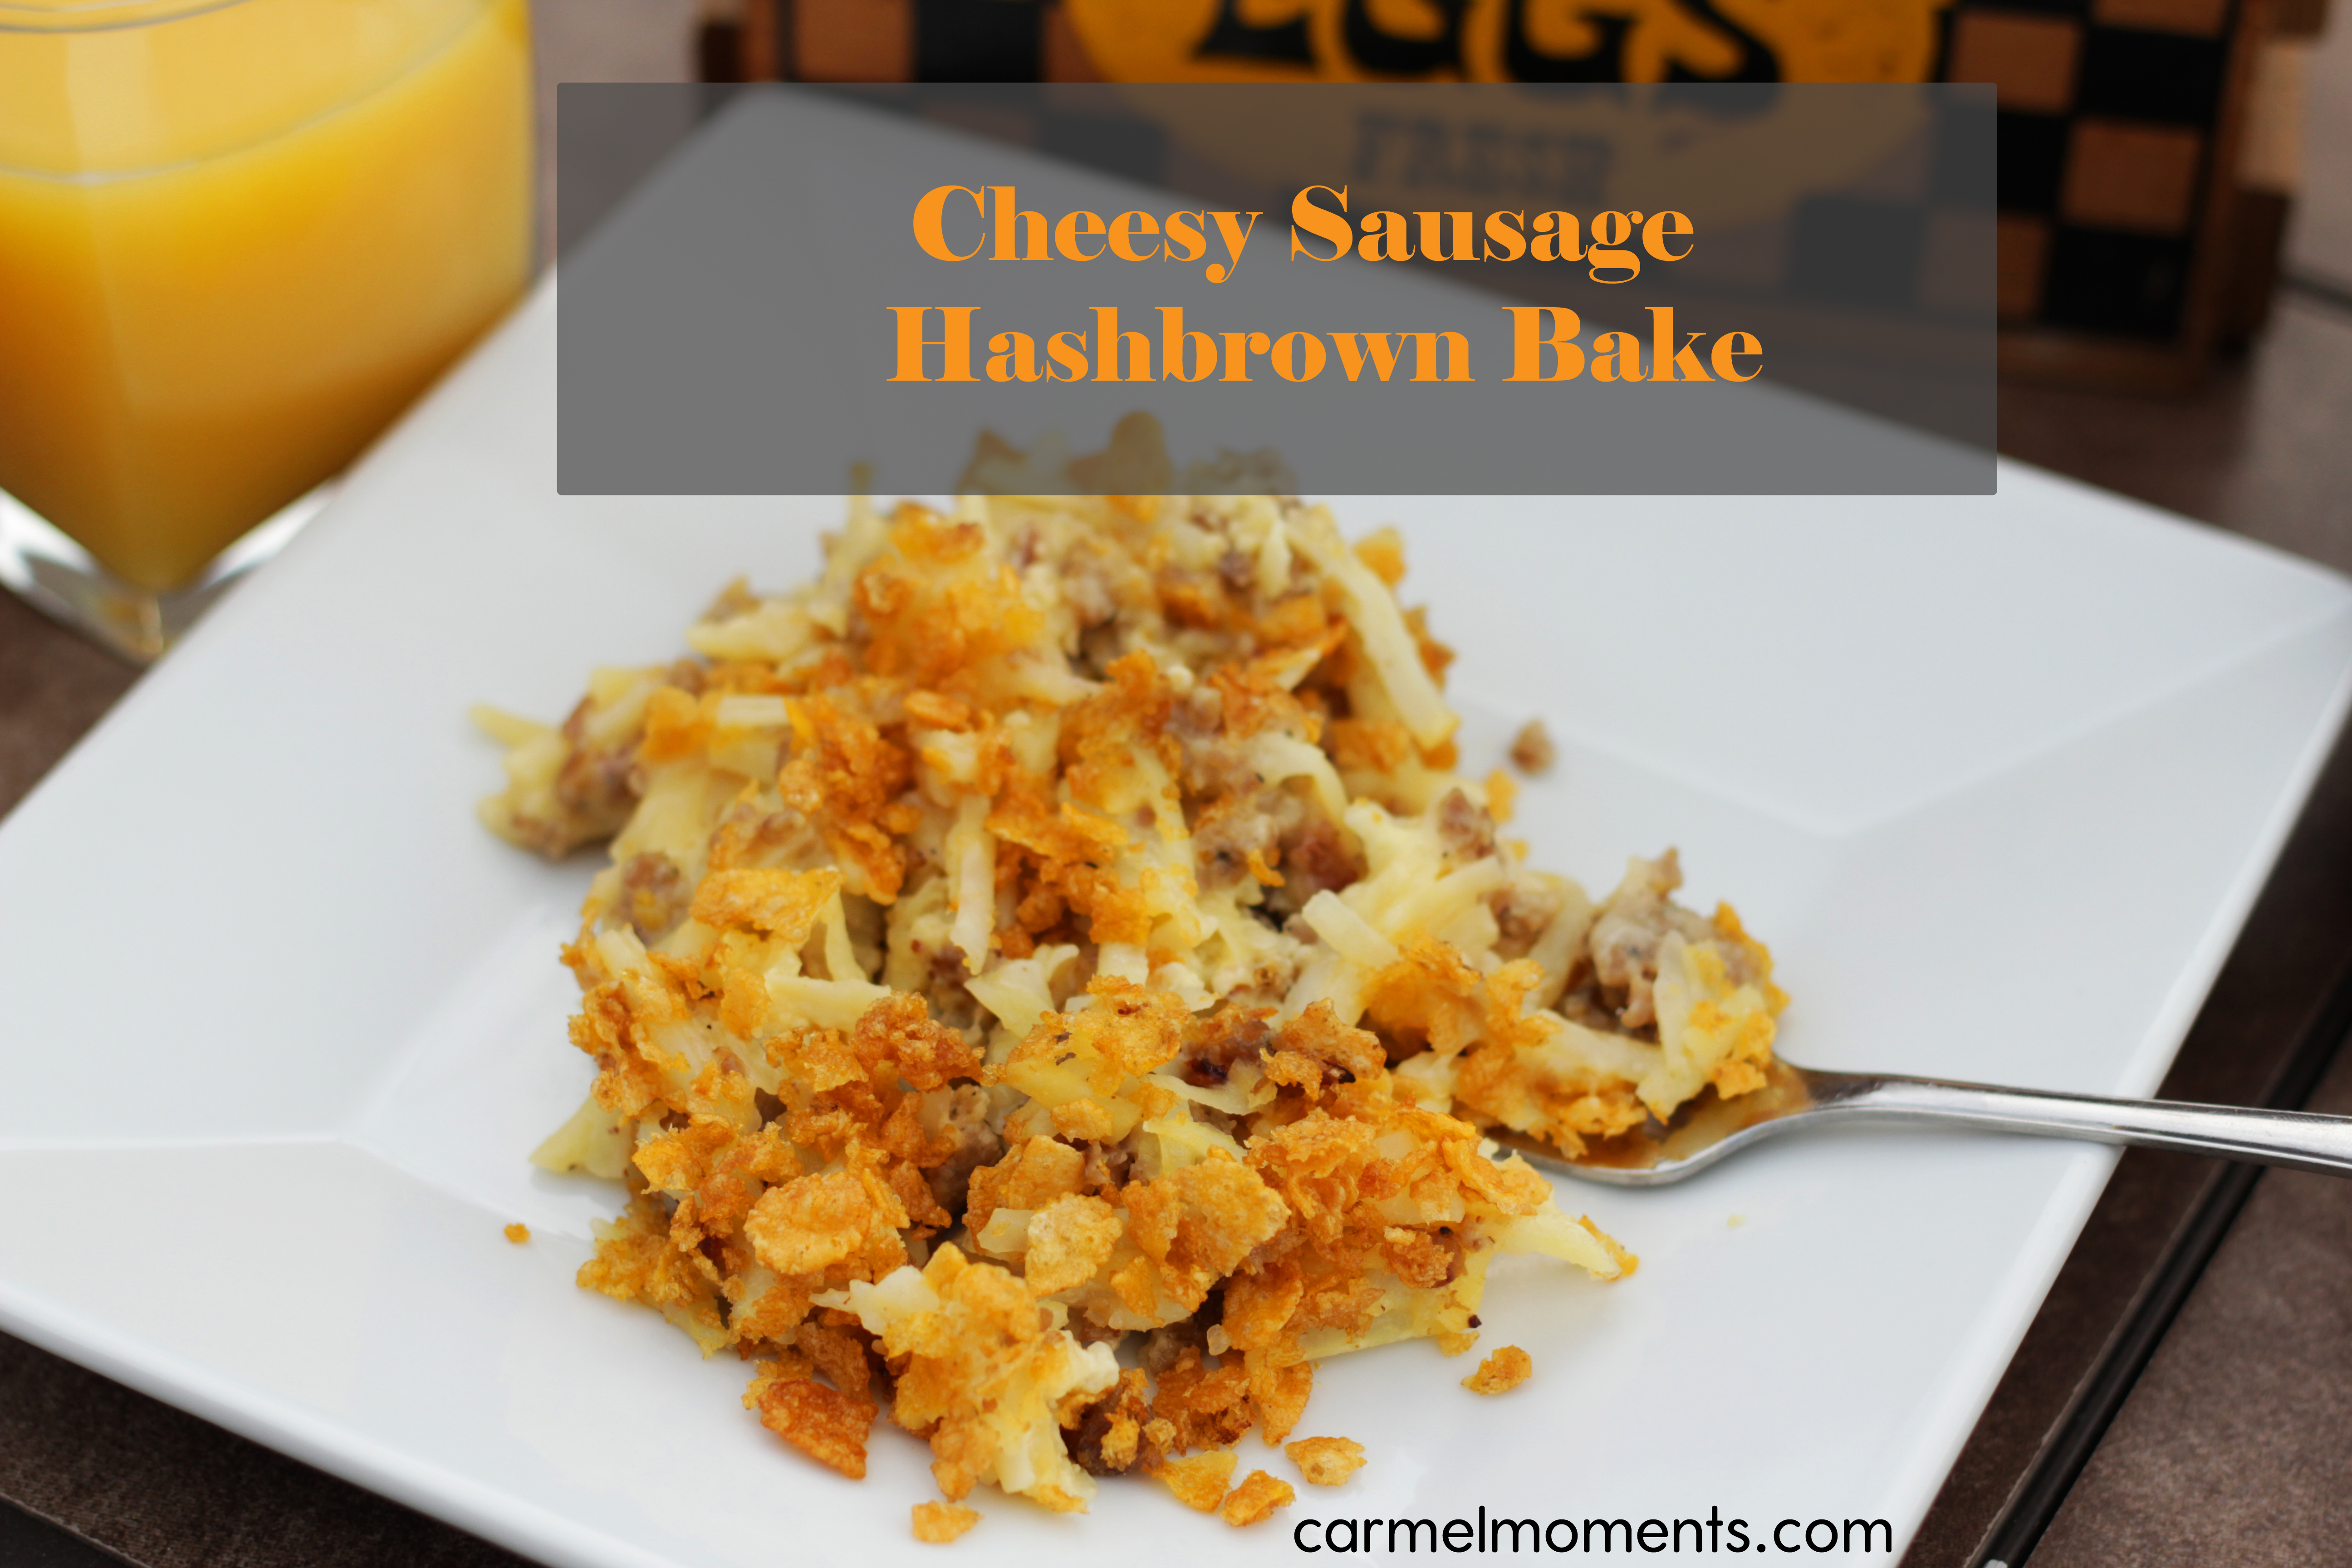 Cheesy Sausage Hash Brown Bake - Real ingredients, real good. No cream of chicken soup, made with sour cream, fresh eggs, real cheese. Favorite family breakfast!